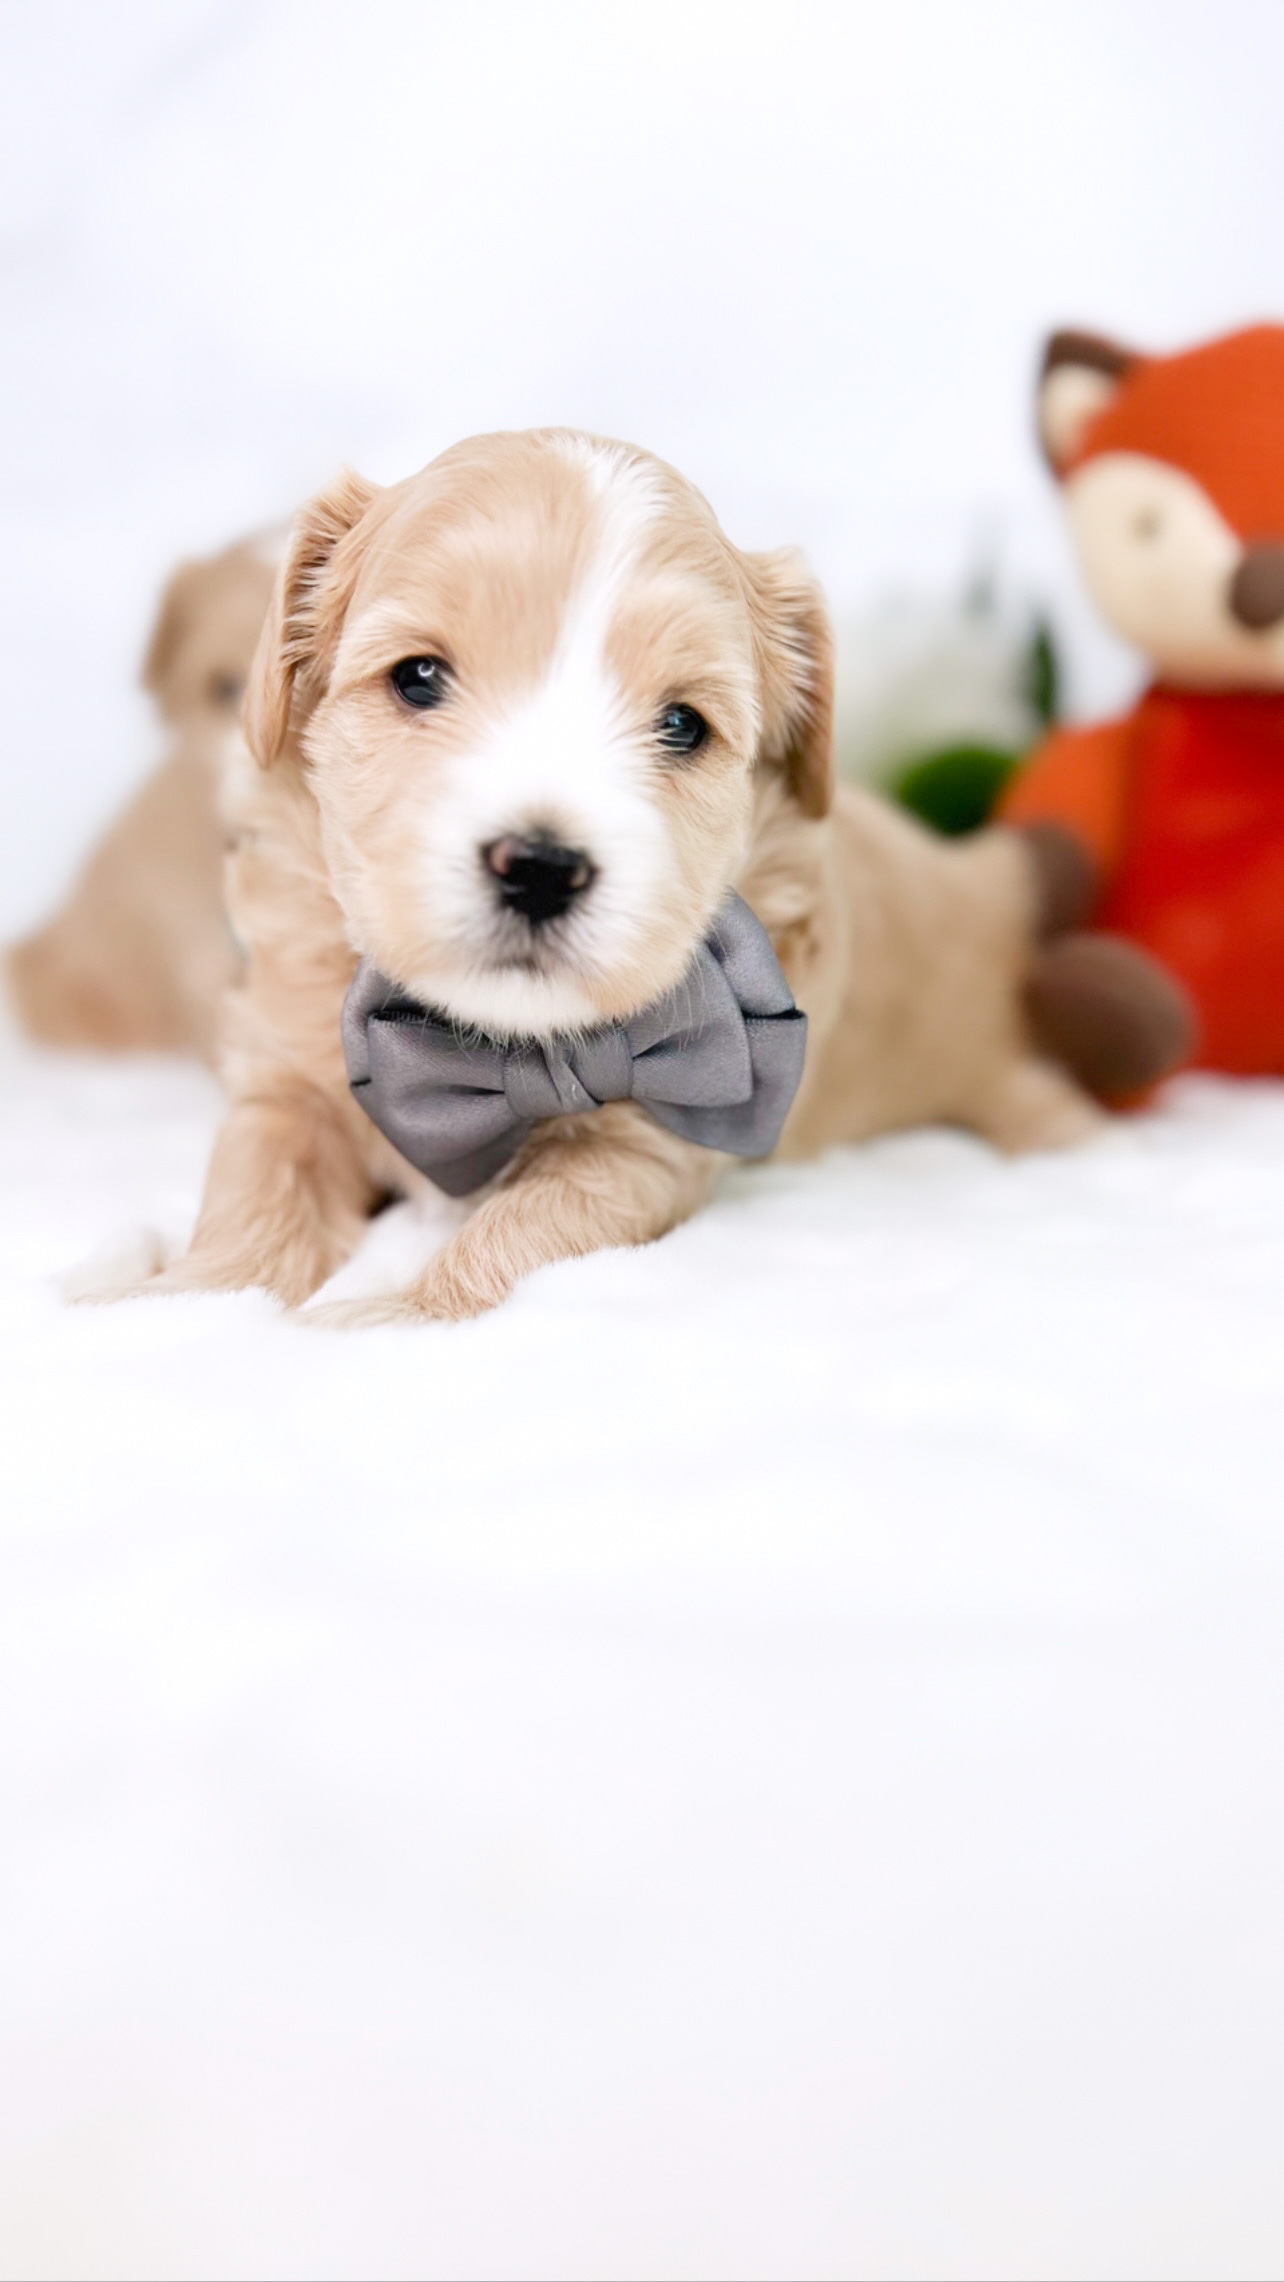 A small puppy wearing a dainty bow tie rests peacefully on a pristine white blanket.